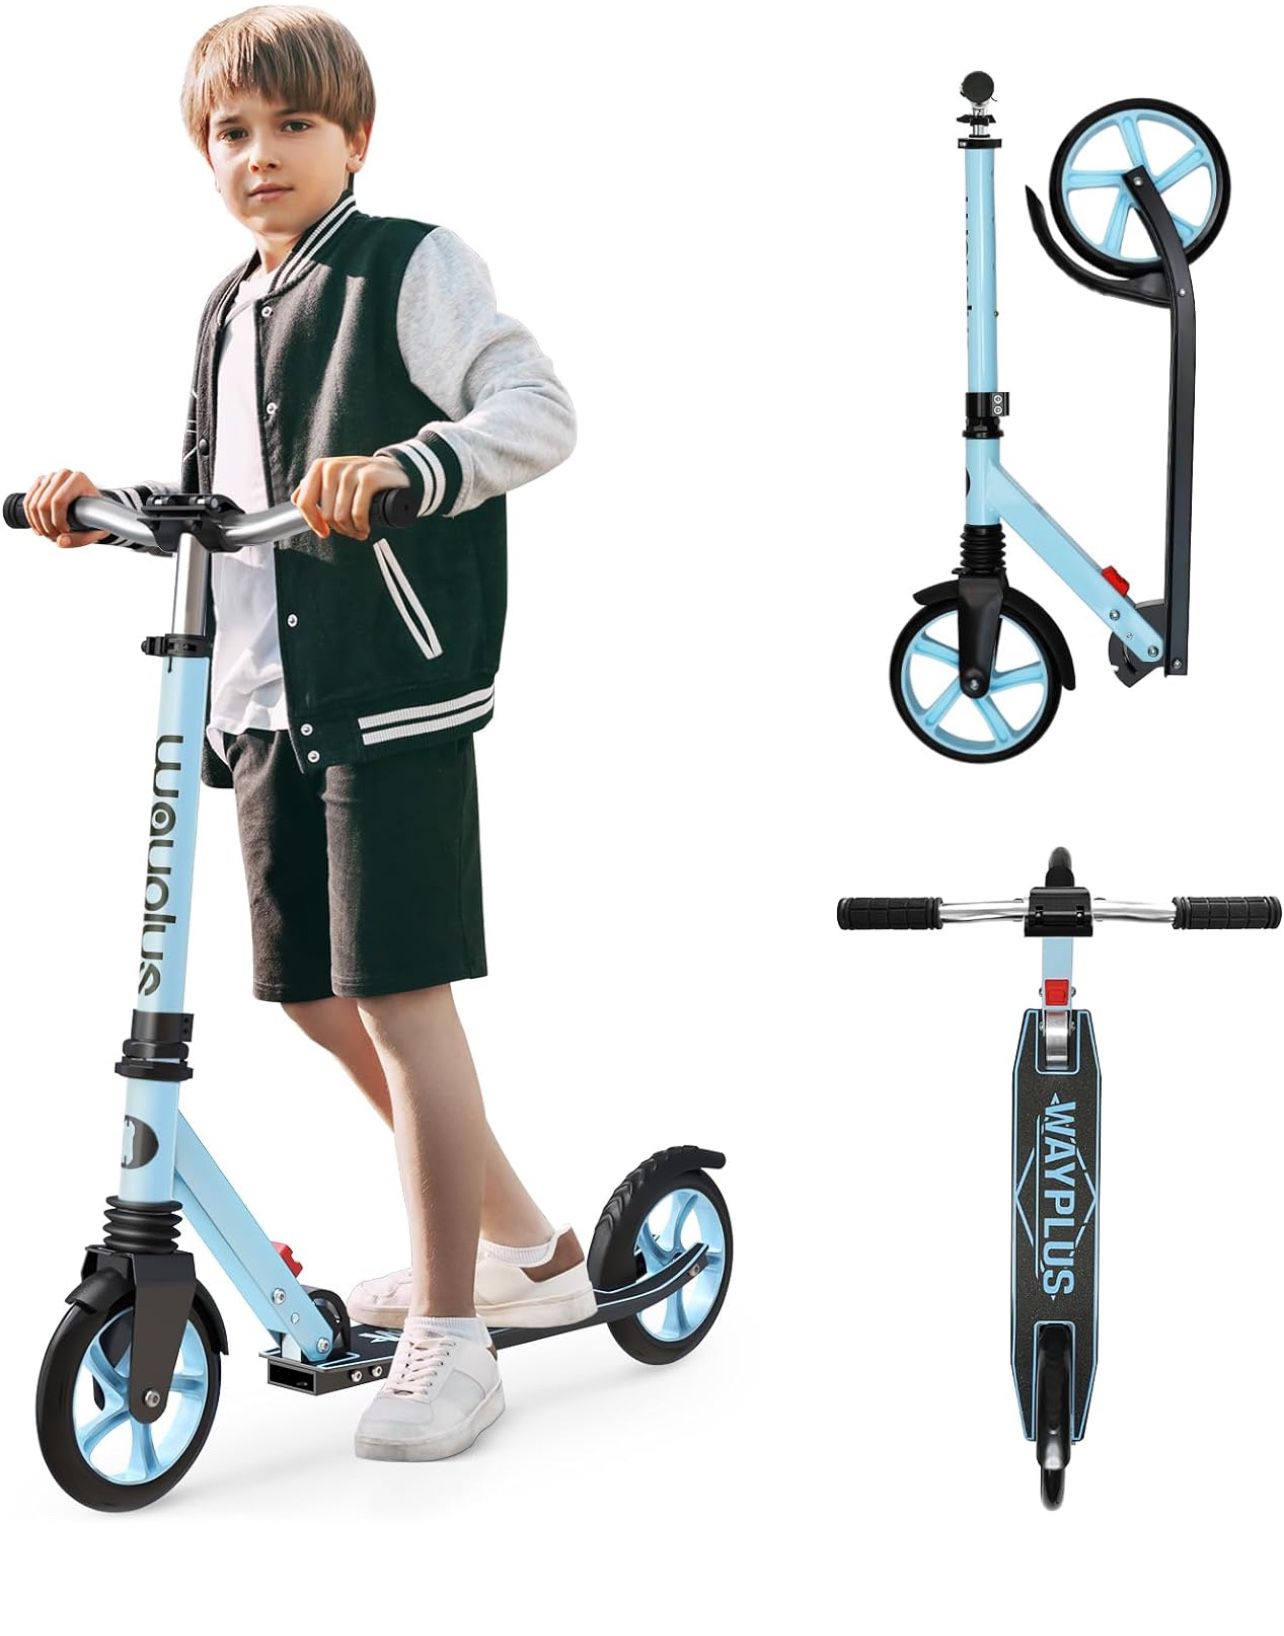 WAYPLUS Kick Scooter for Ages 6+,Kid, Teens & Adults. Max Load 240 LBS. Foldable, Lightweight, 8IN Big Wheels for Kids, Teen and Adults, 4 Adjustable 